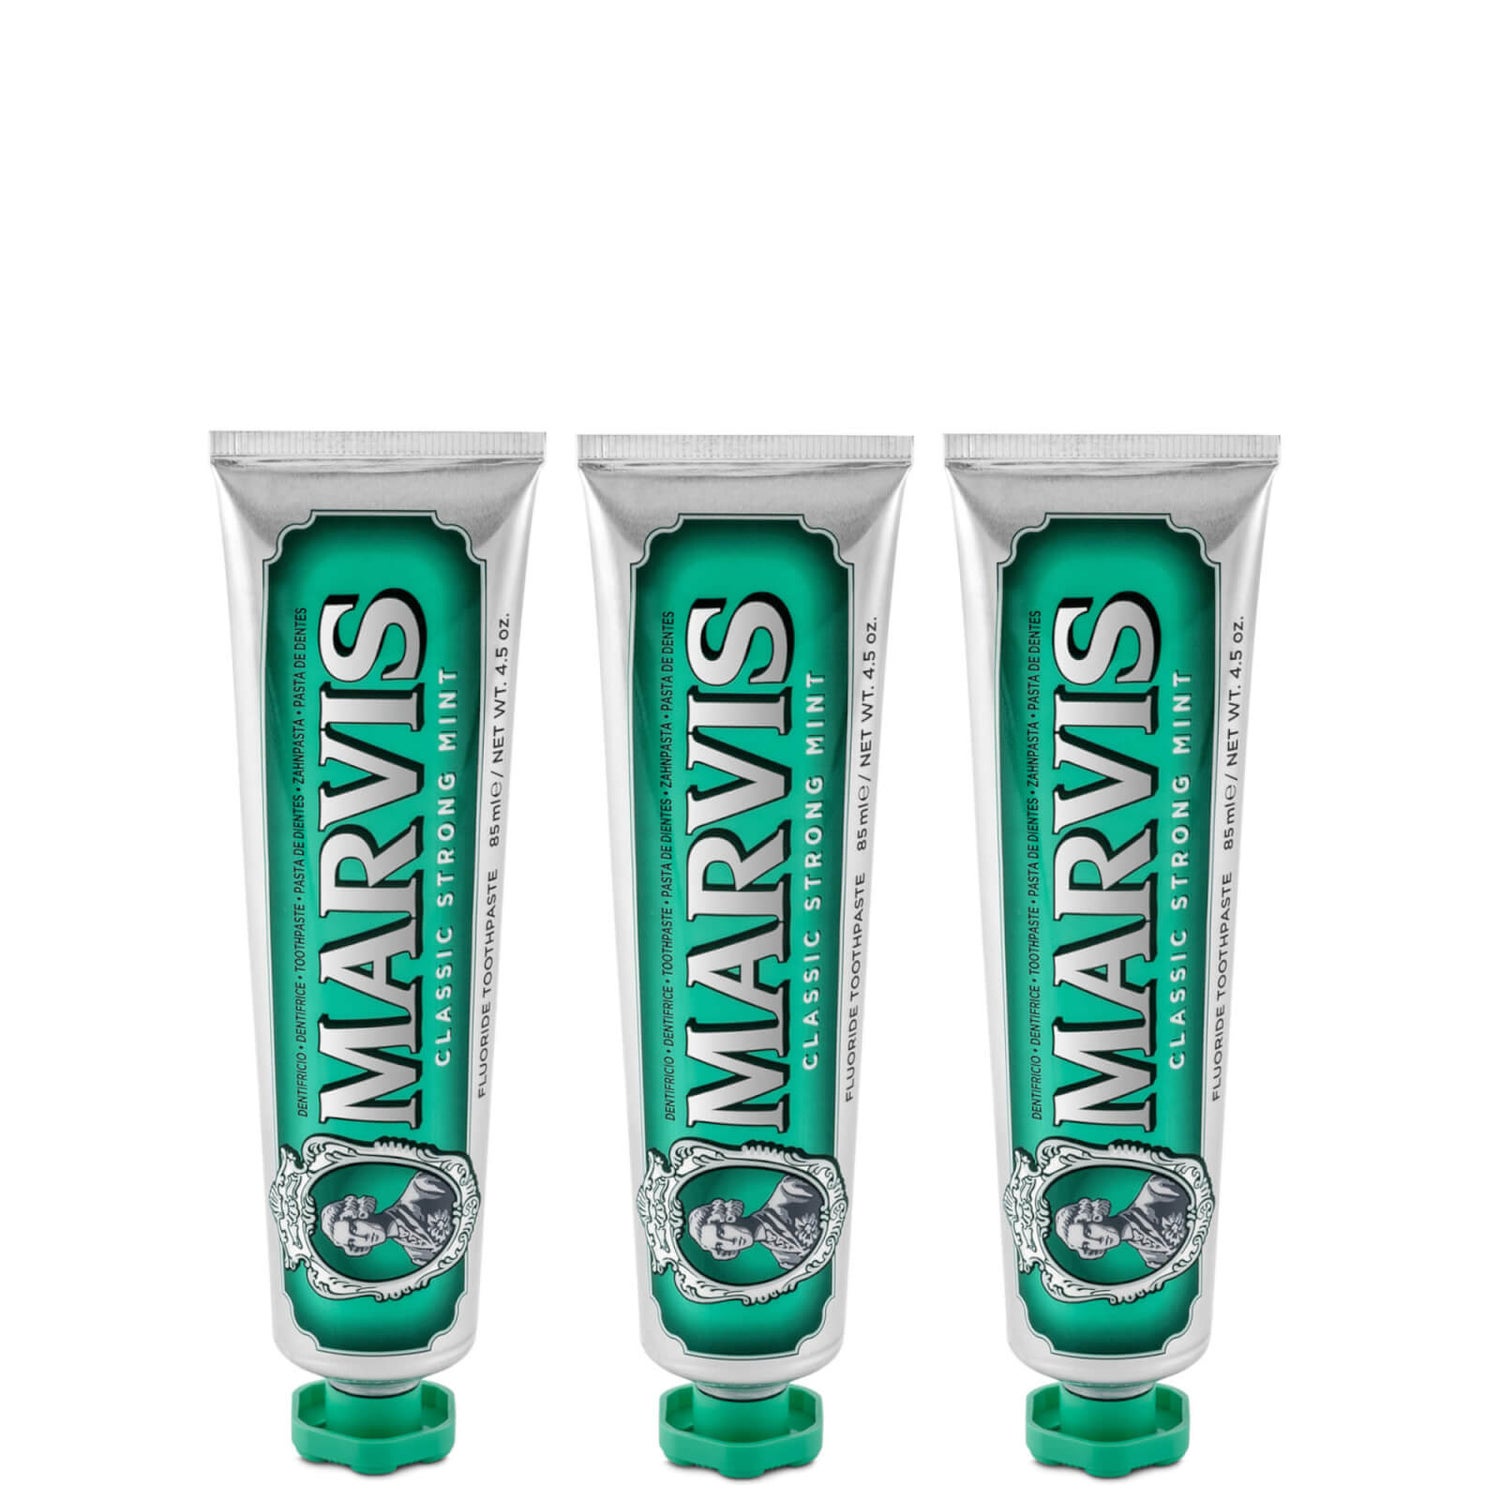 Marvis Classic Strong Mint Toothpaste Bundle (3 x 85 ml)